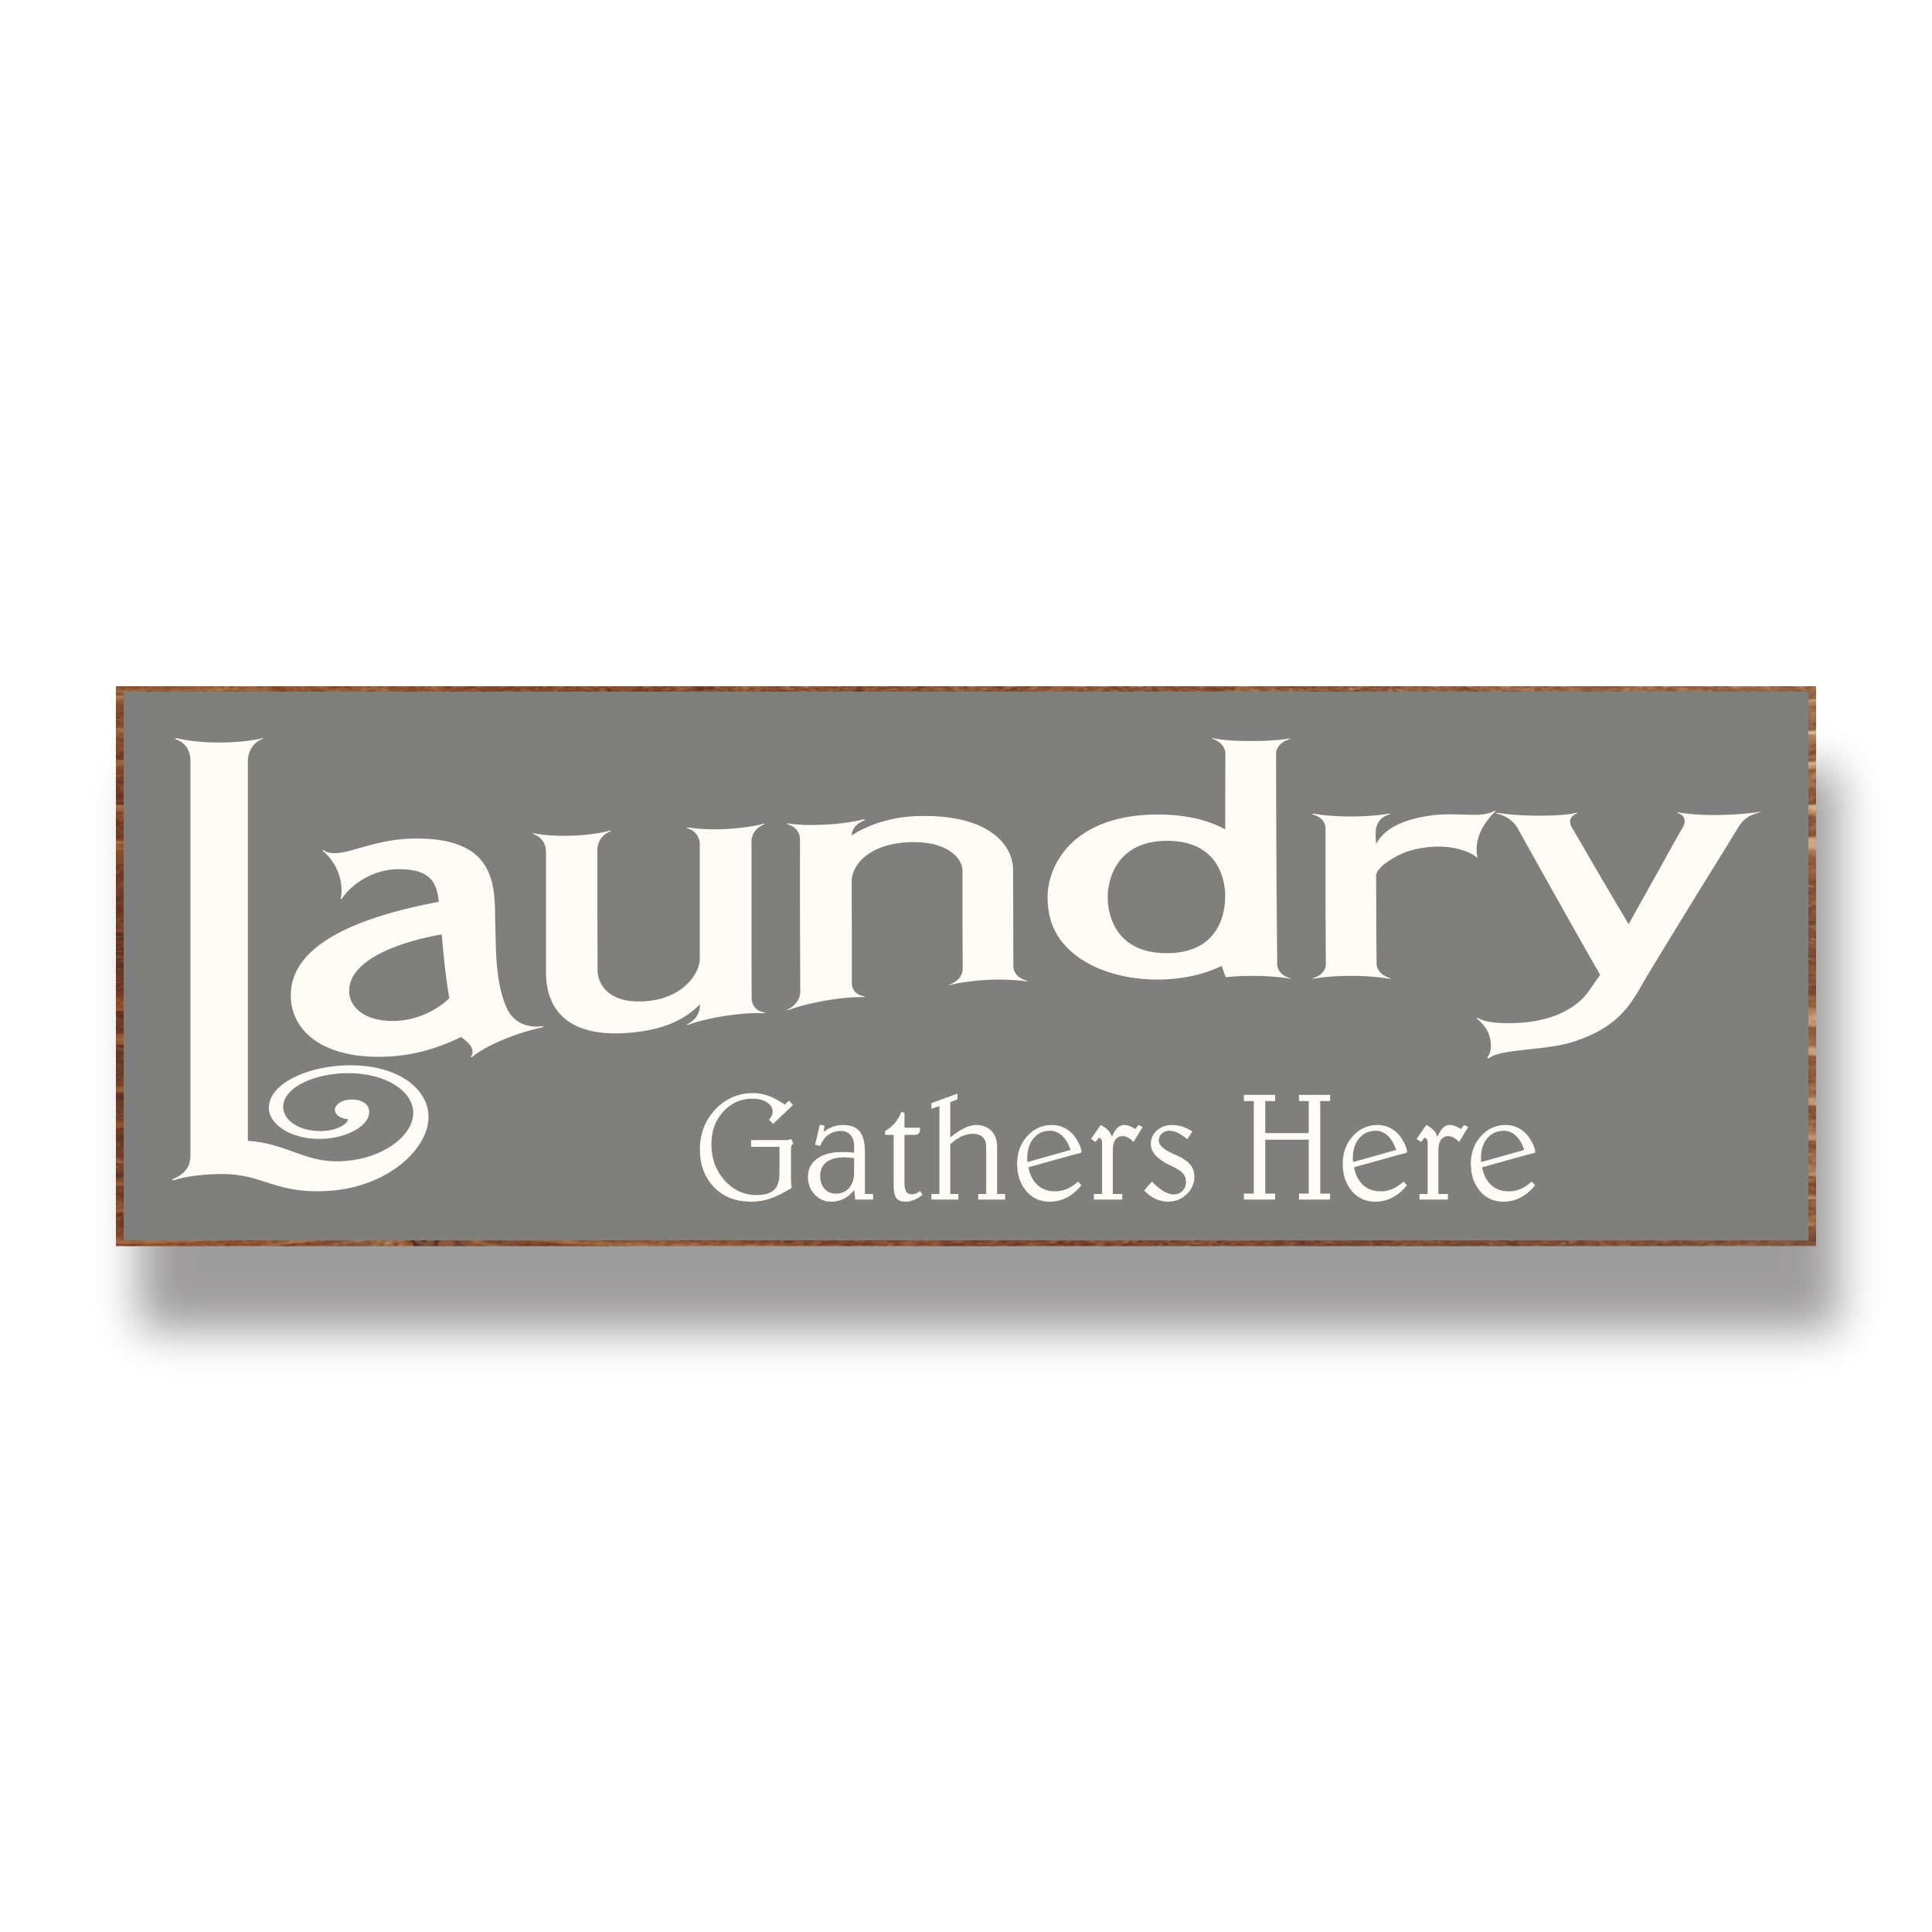 Laundry Gathers Here Sign